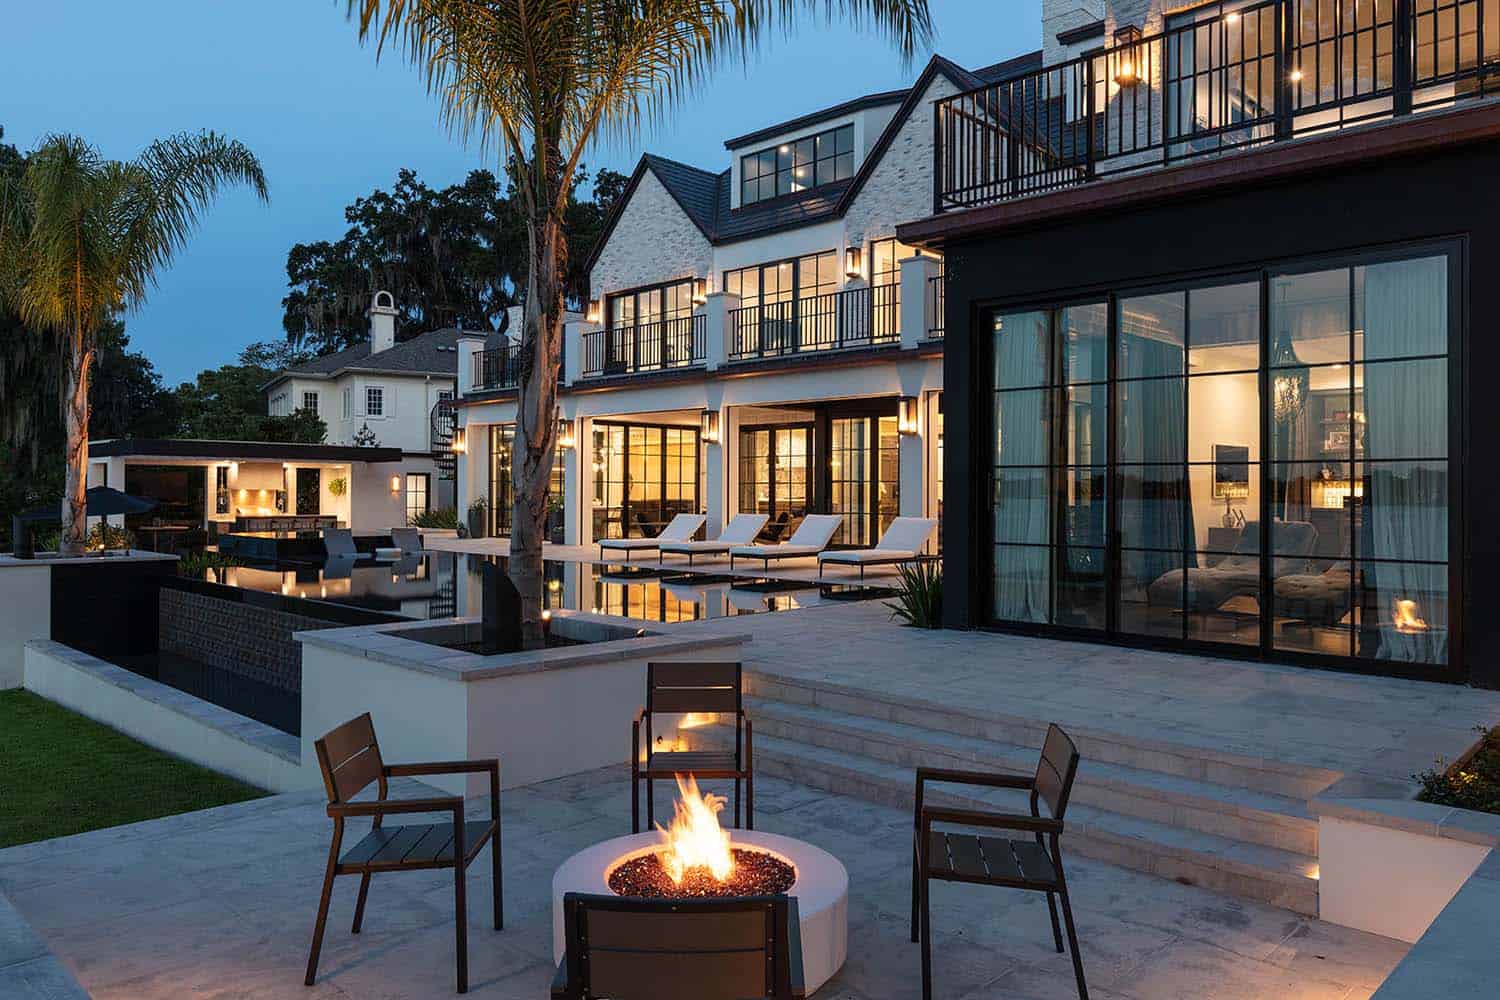 transitional style home exterior backyard patio with a fire pit